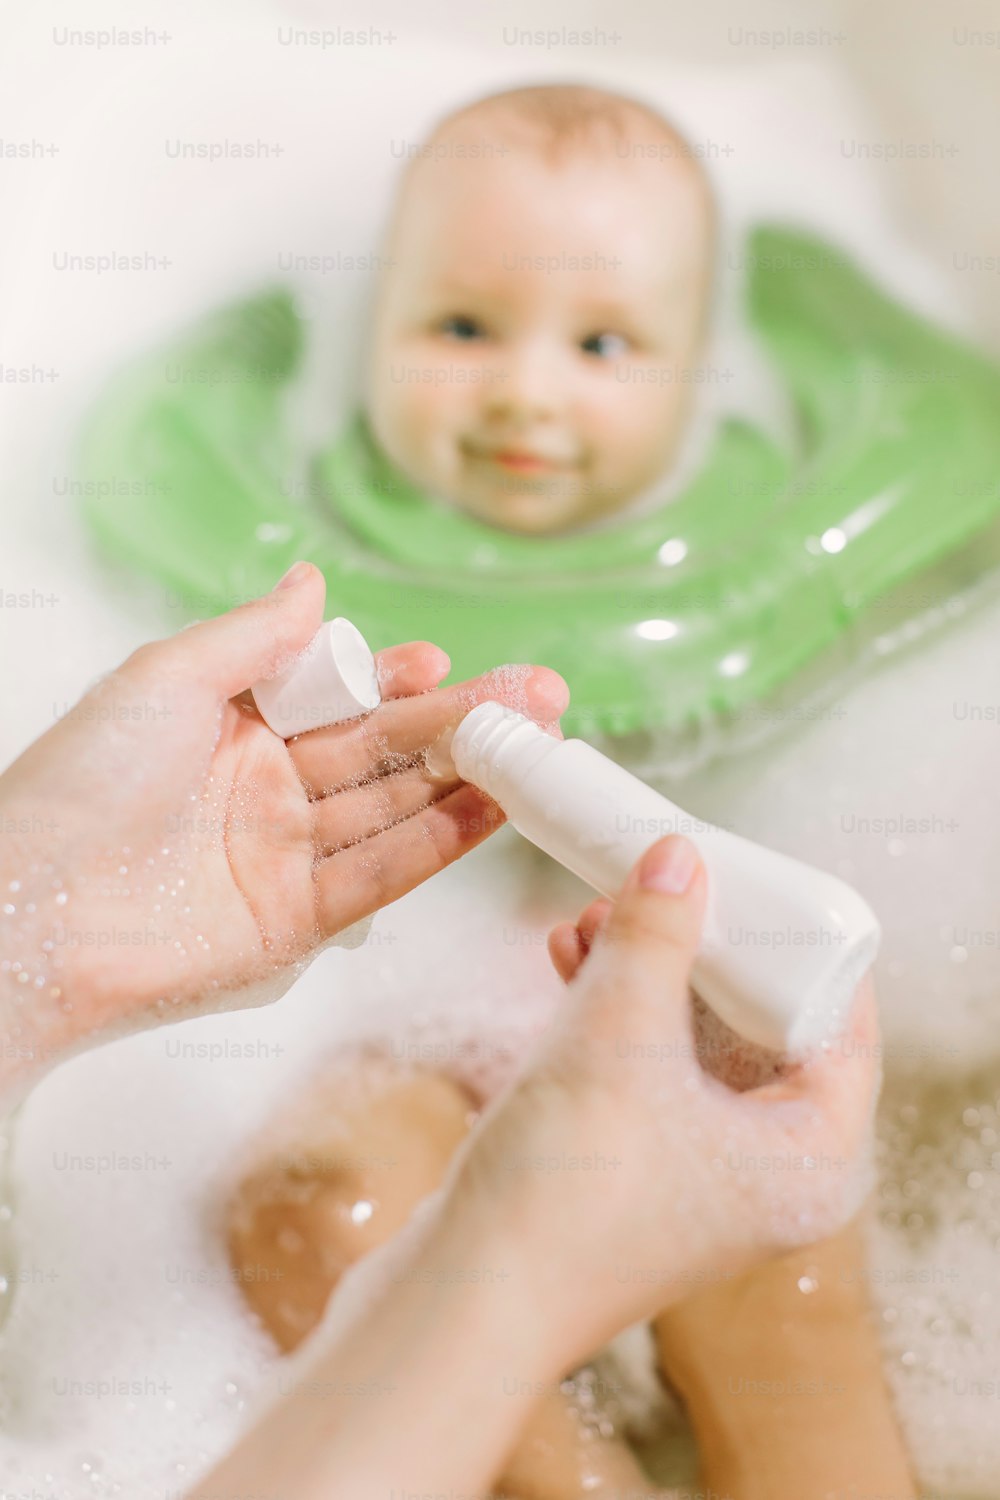 Baby swimming with green neck swim ring. mom squeezes shampoo out of the tube